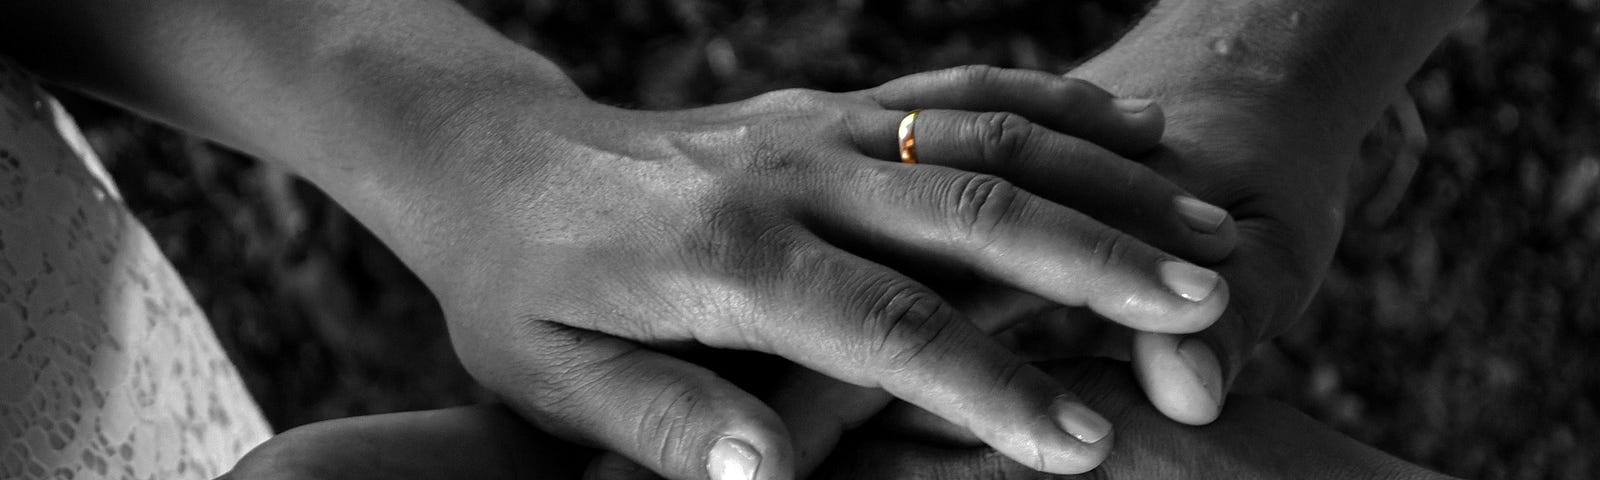 Hands coming together in a gesture of marriage with rings on wedding fingers.